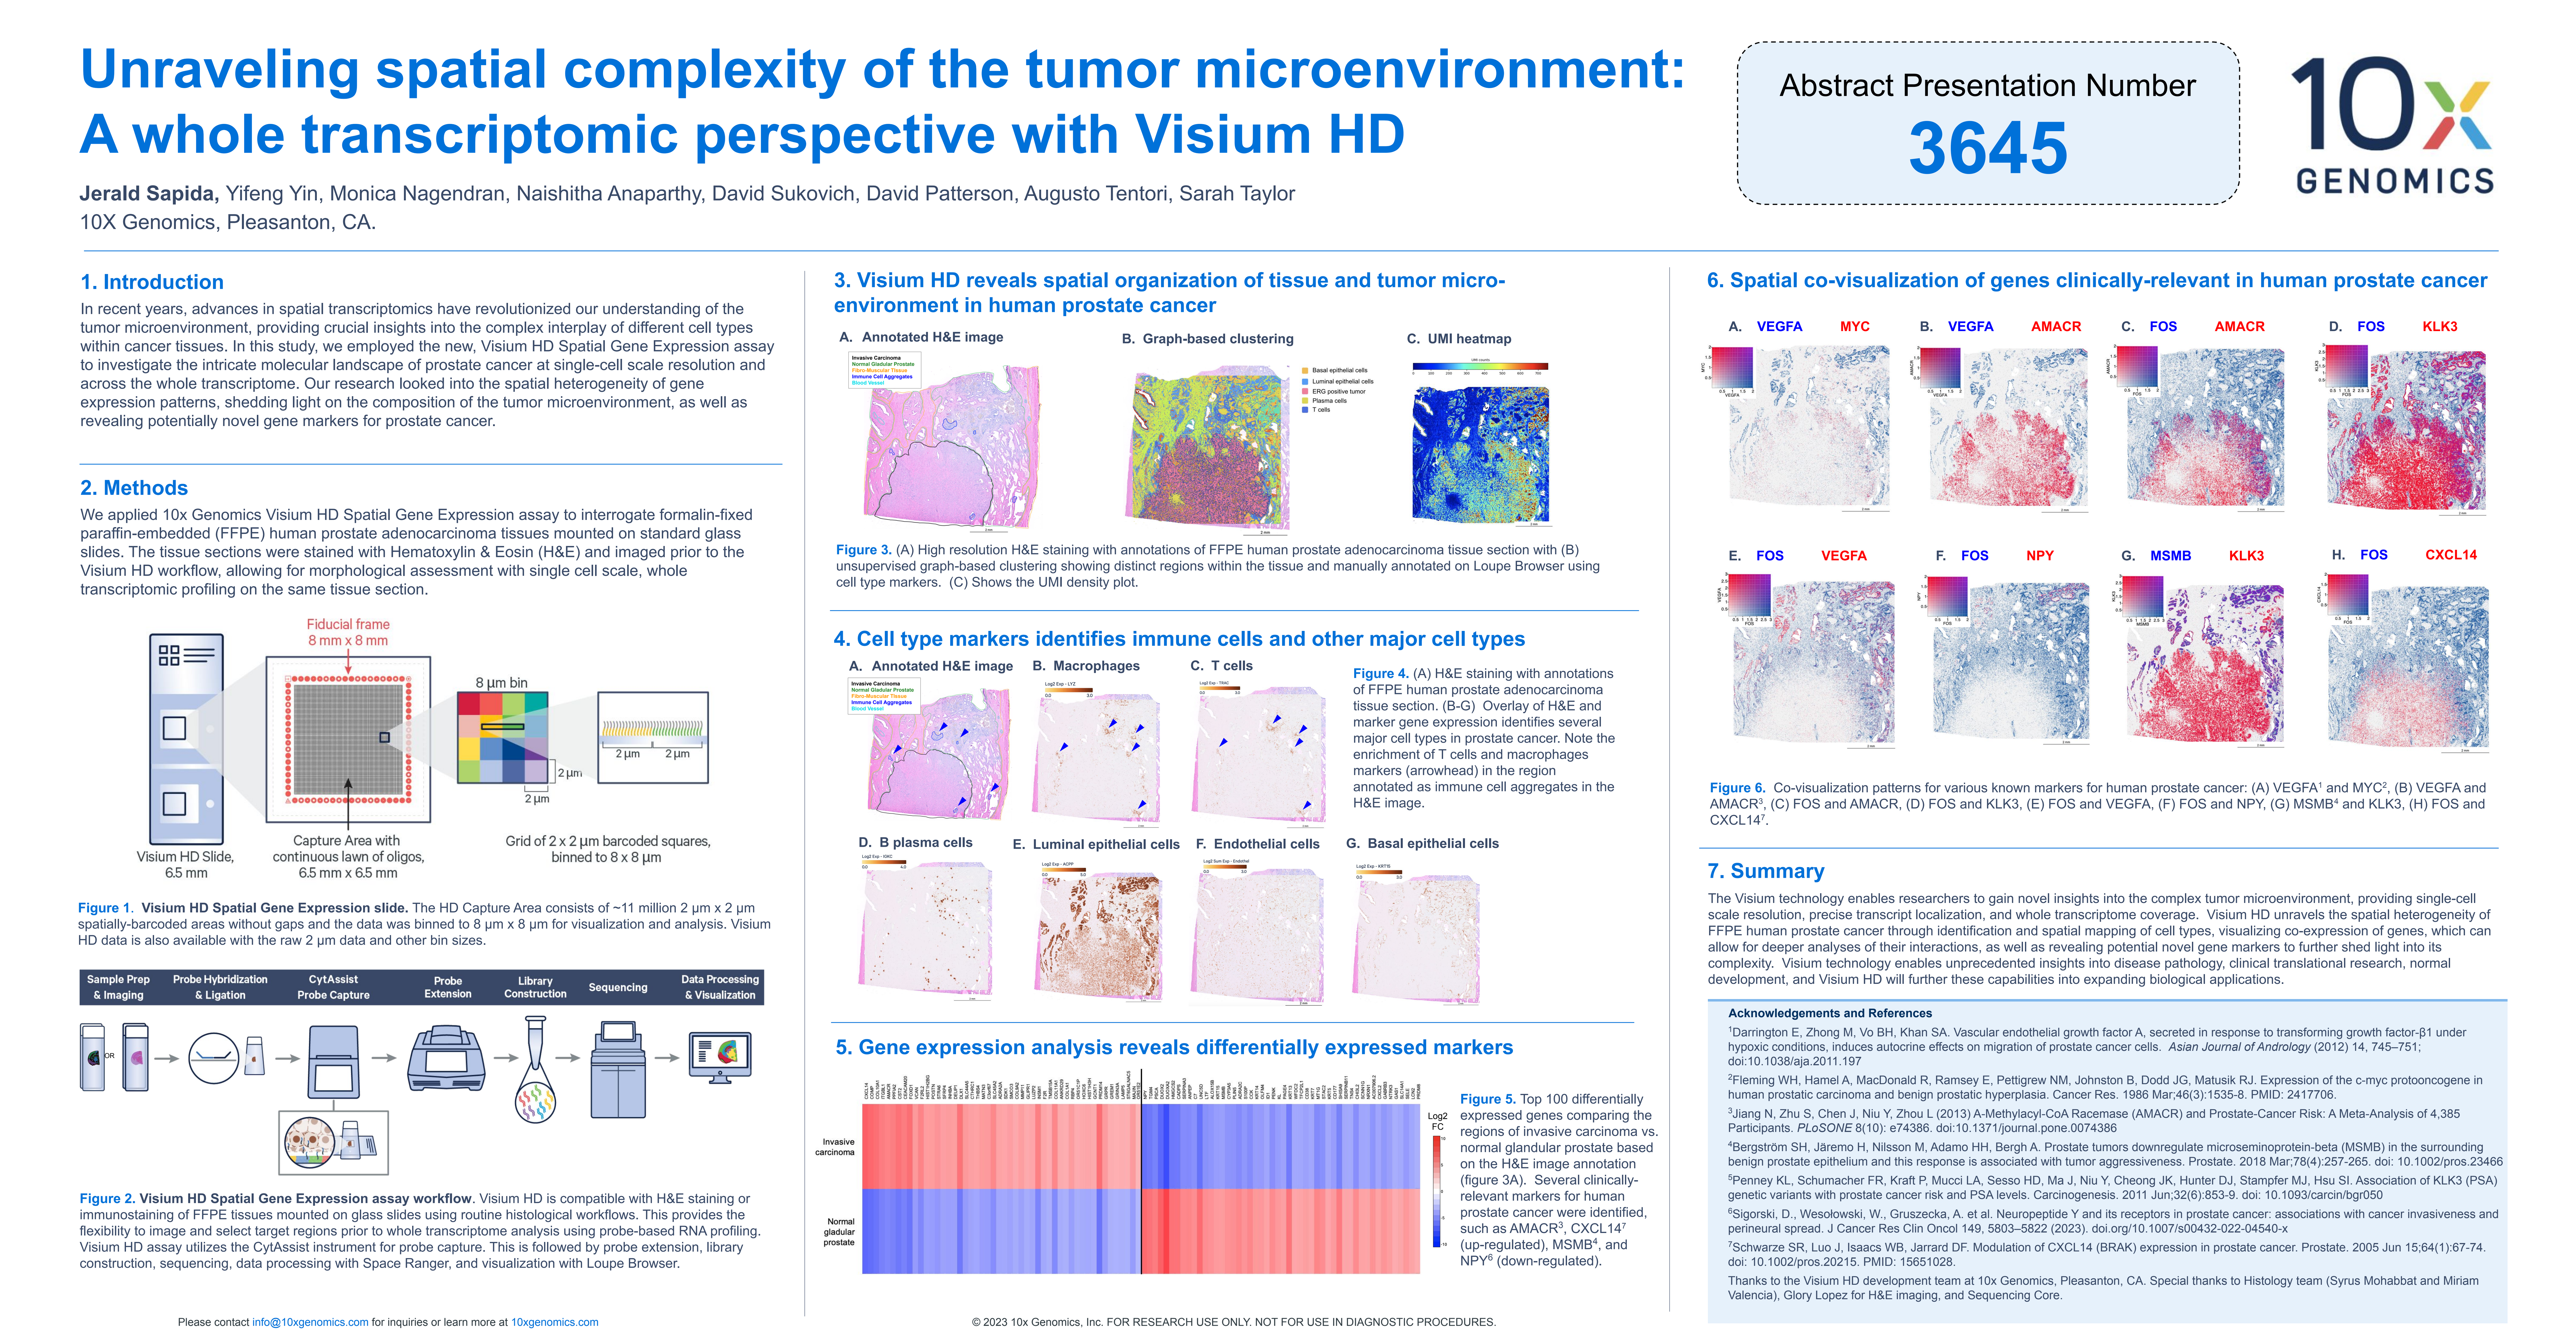 Unraveling spatial complexity of the tumor microenvironment: A whole transcriptomic perspective with Visium HD